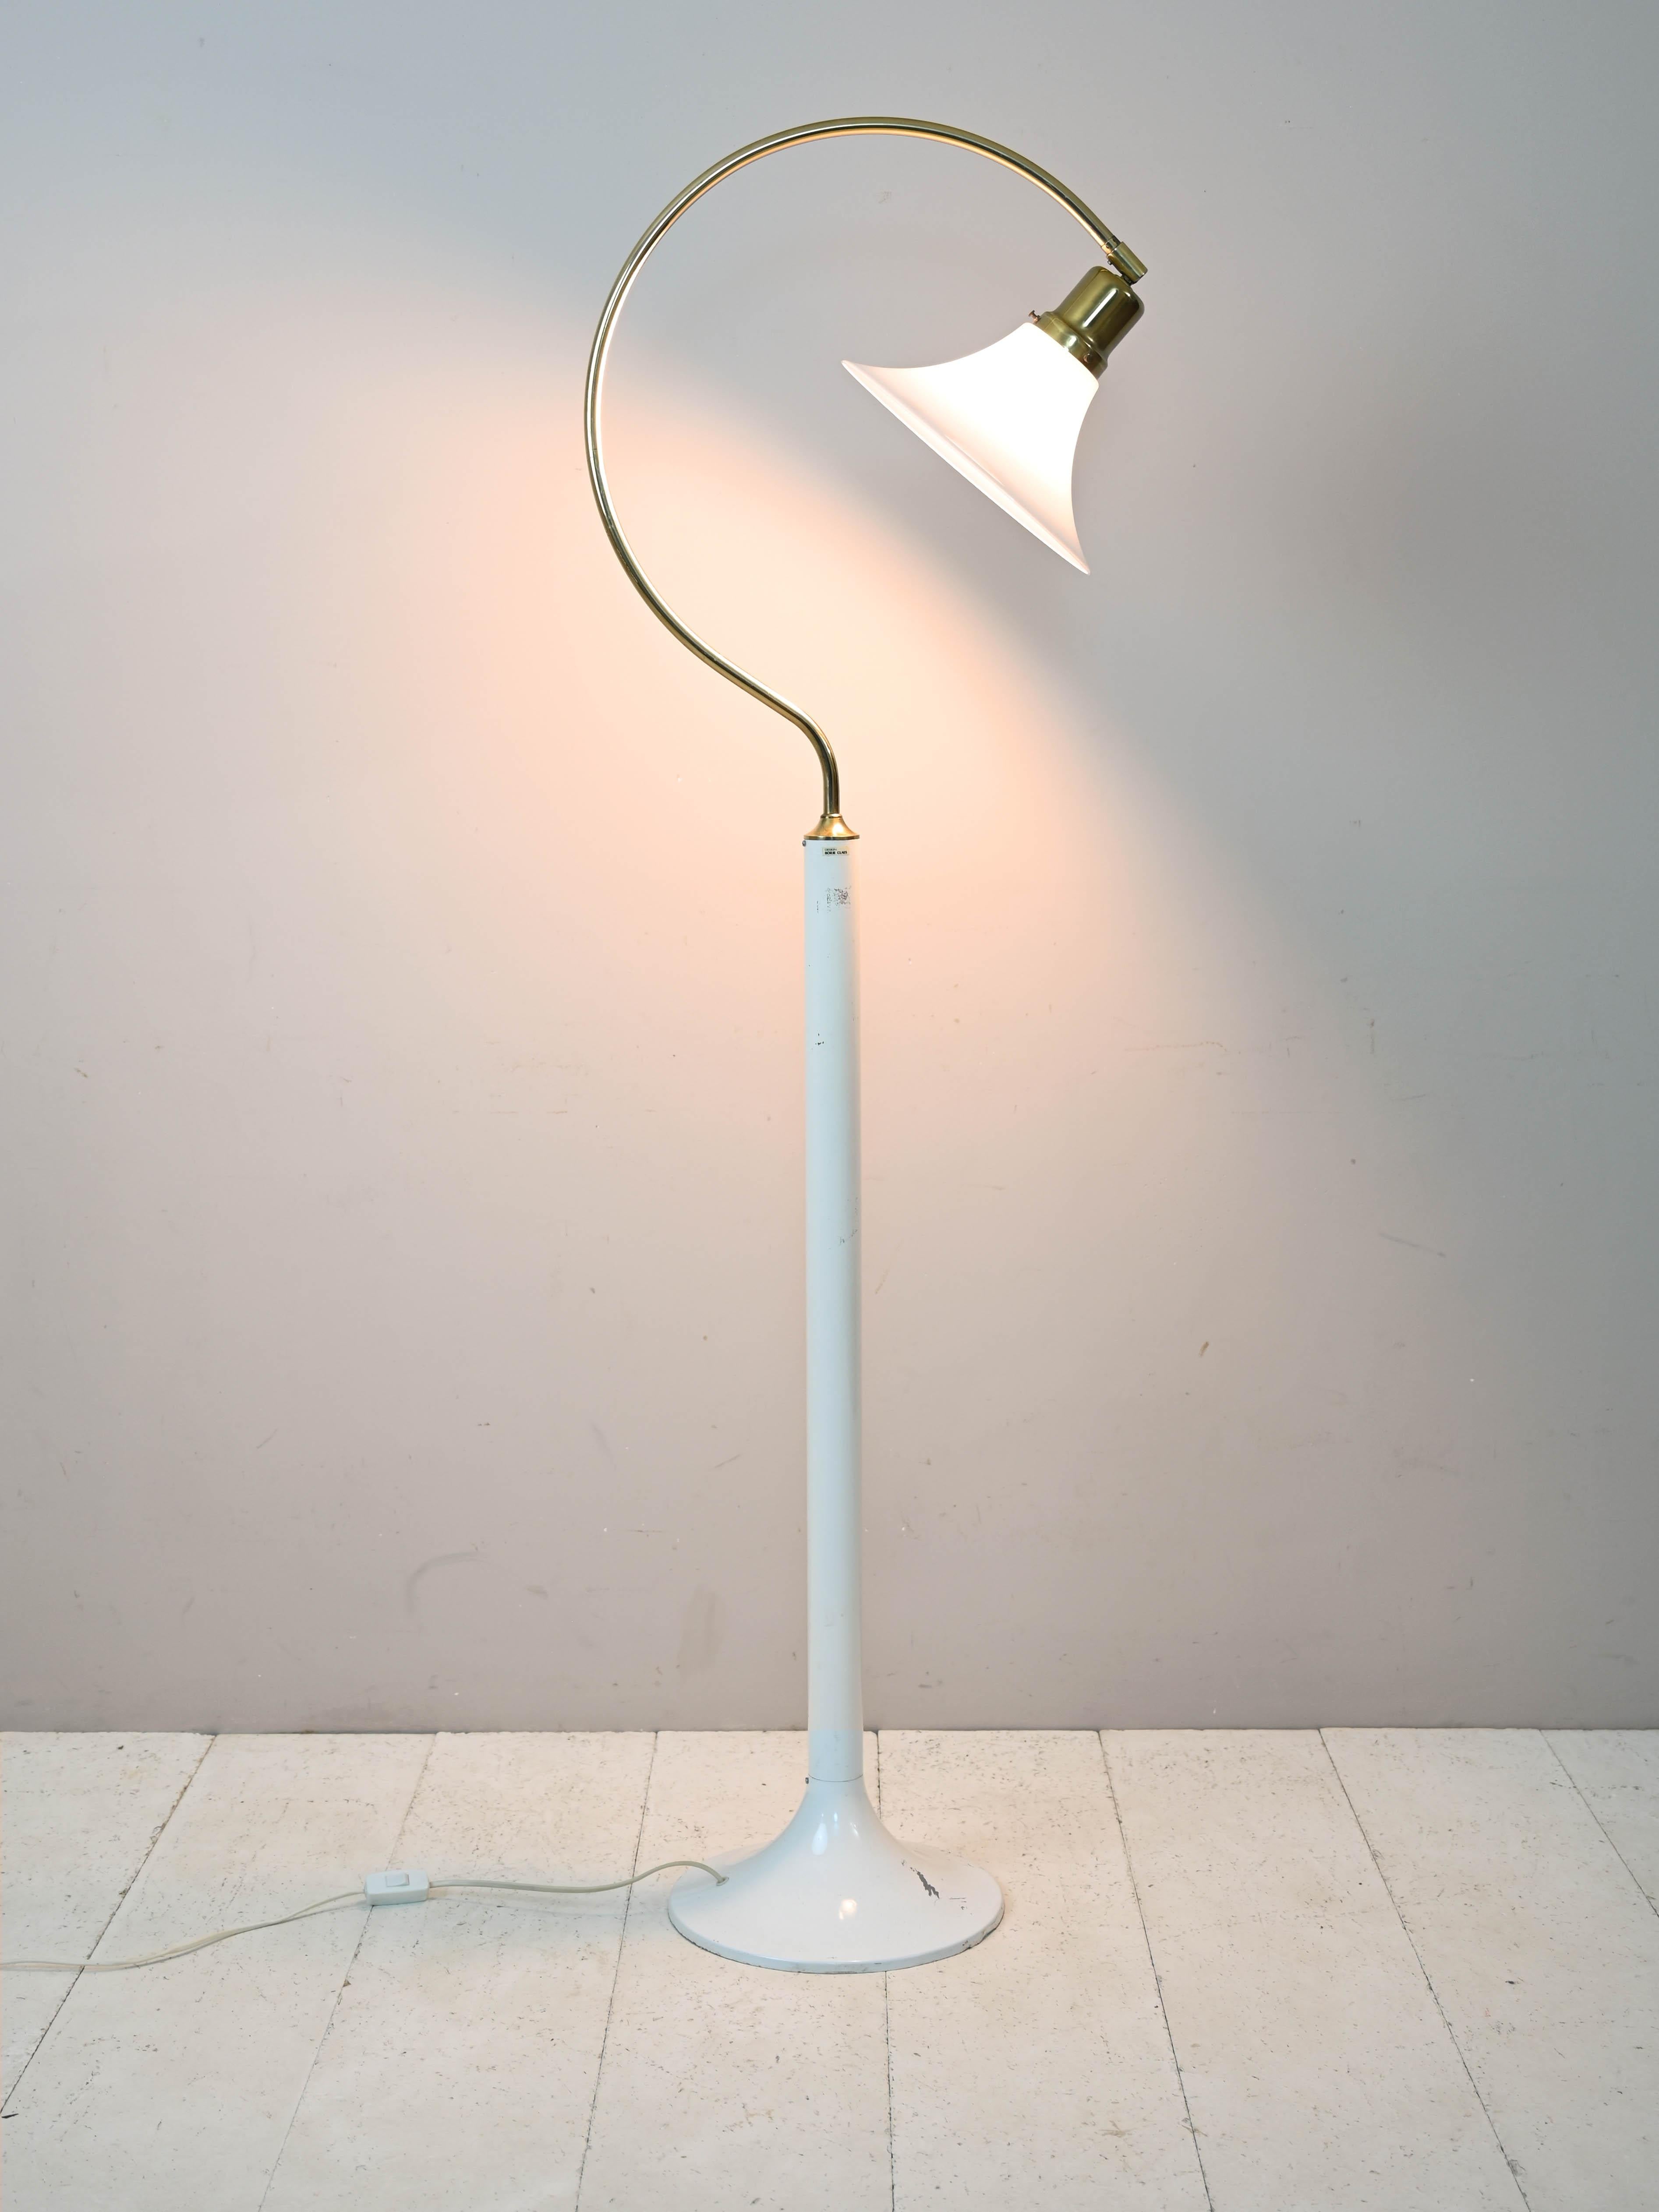 Peculiar original Scandinavian lamp made of plastic and metal.

This piece of furniture is distinguished by the original shape of the stem, which takes the form of a C at the end, made of golden metal.
The hard plastic shade is white like the